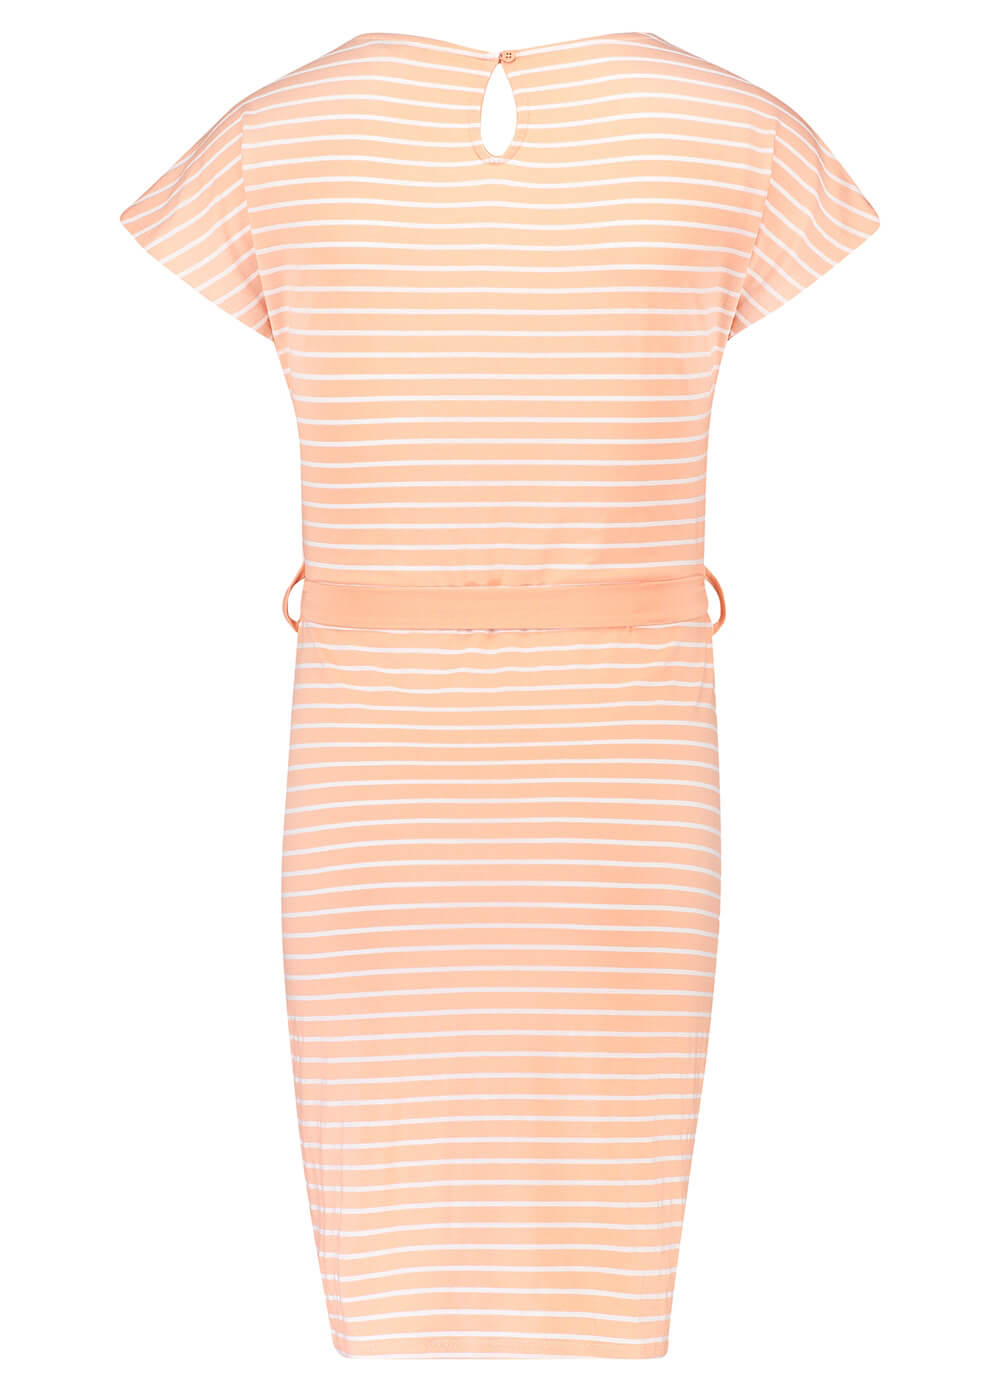 Daantje Maternity Dress in Peach Stripes by Noppies